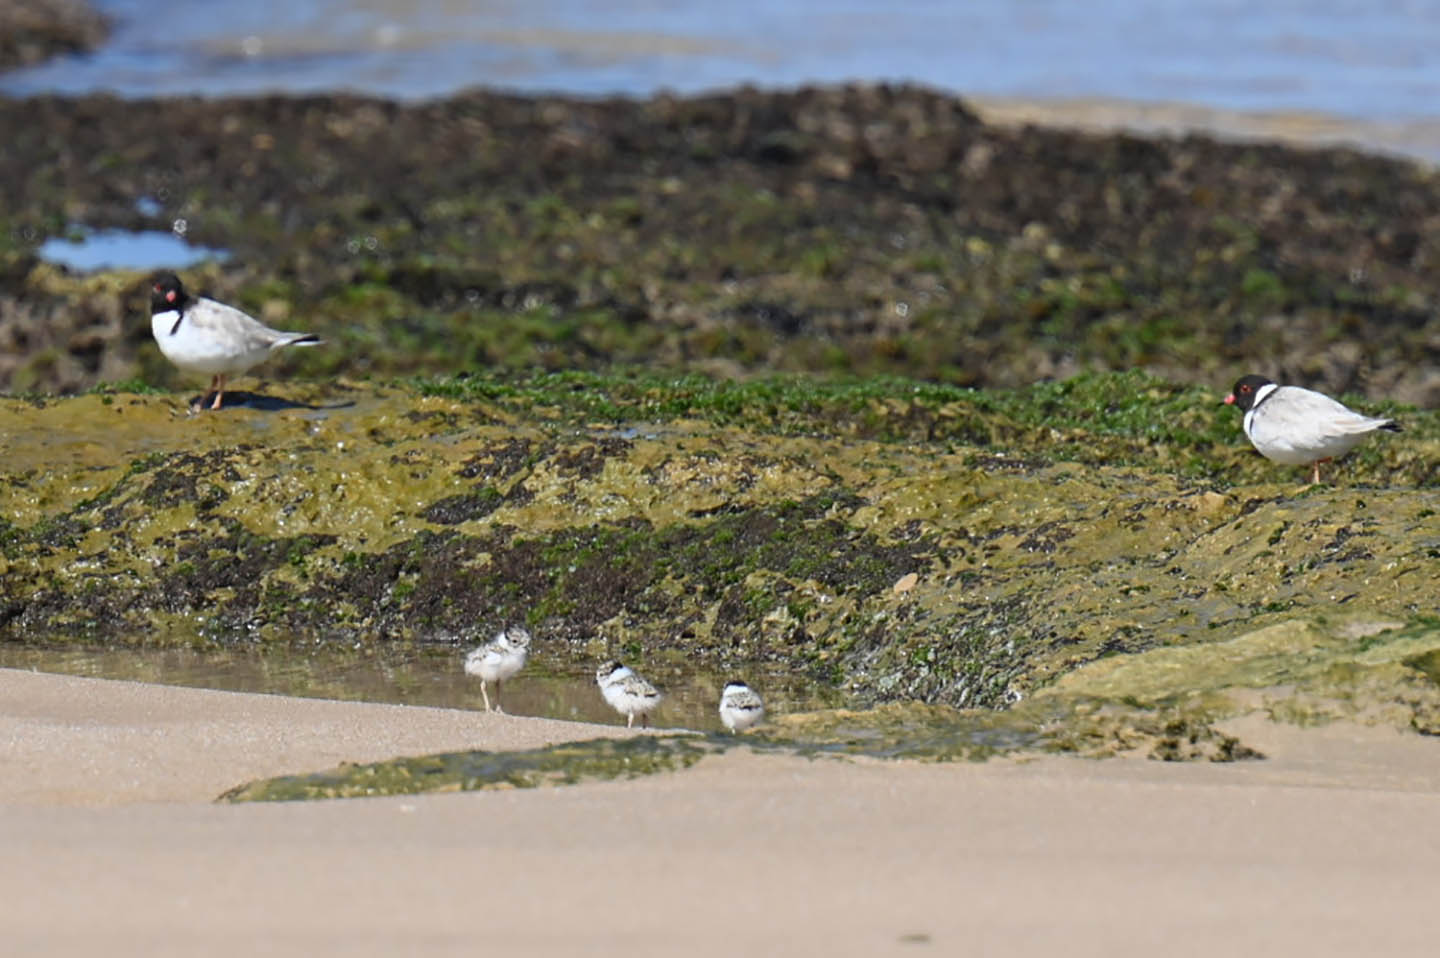 A hooded plover family on the sand in the Mornington Peninsula National Park